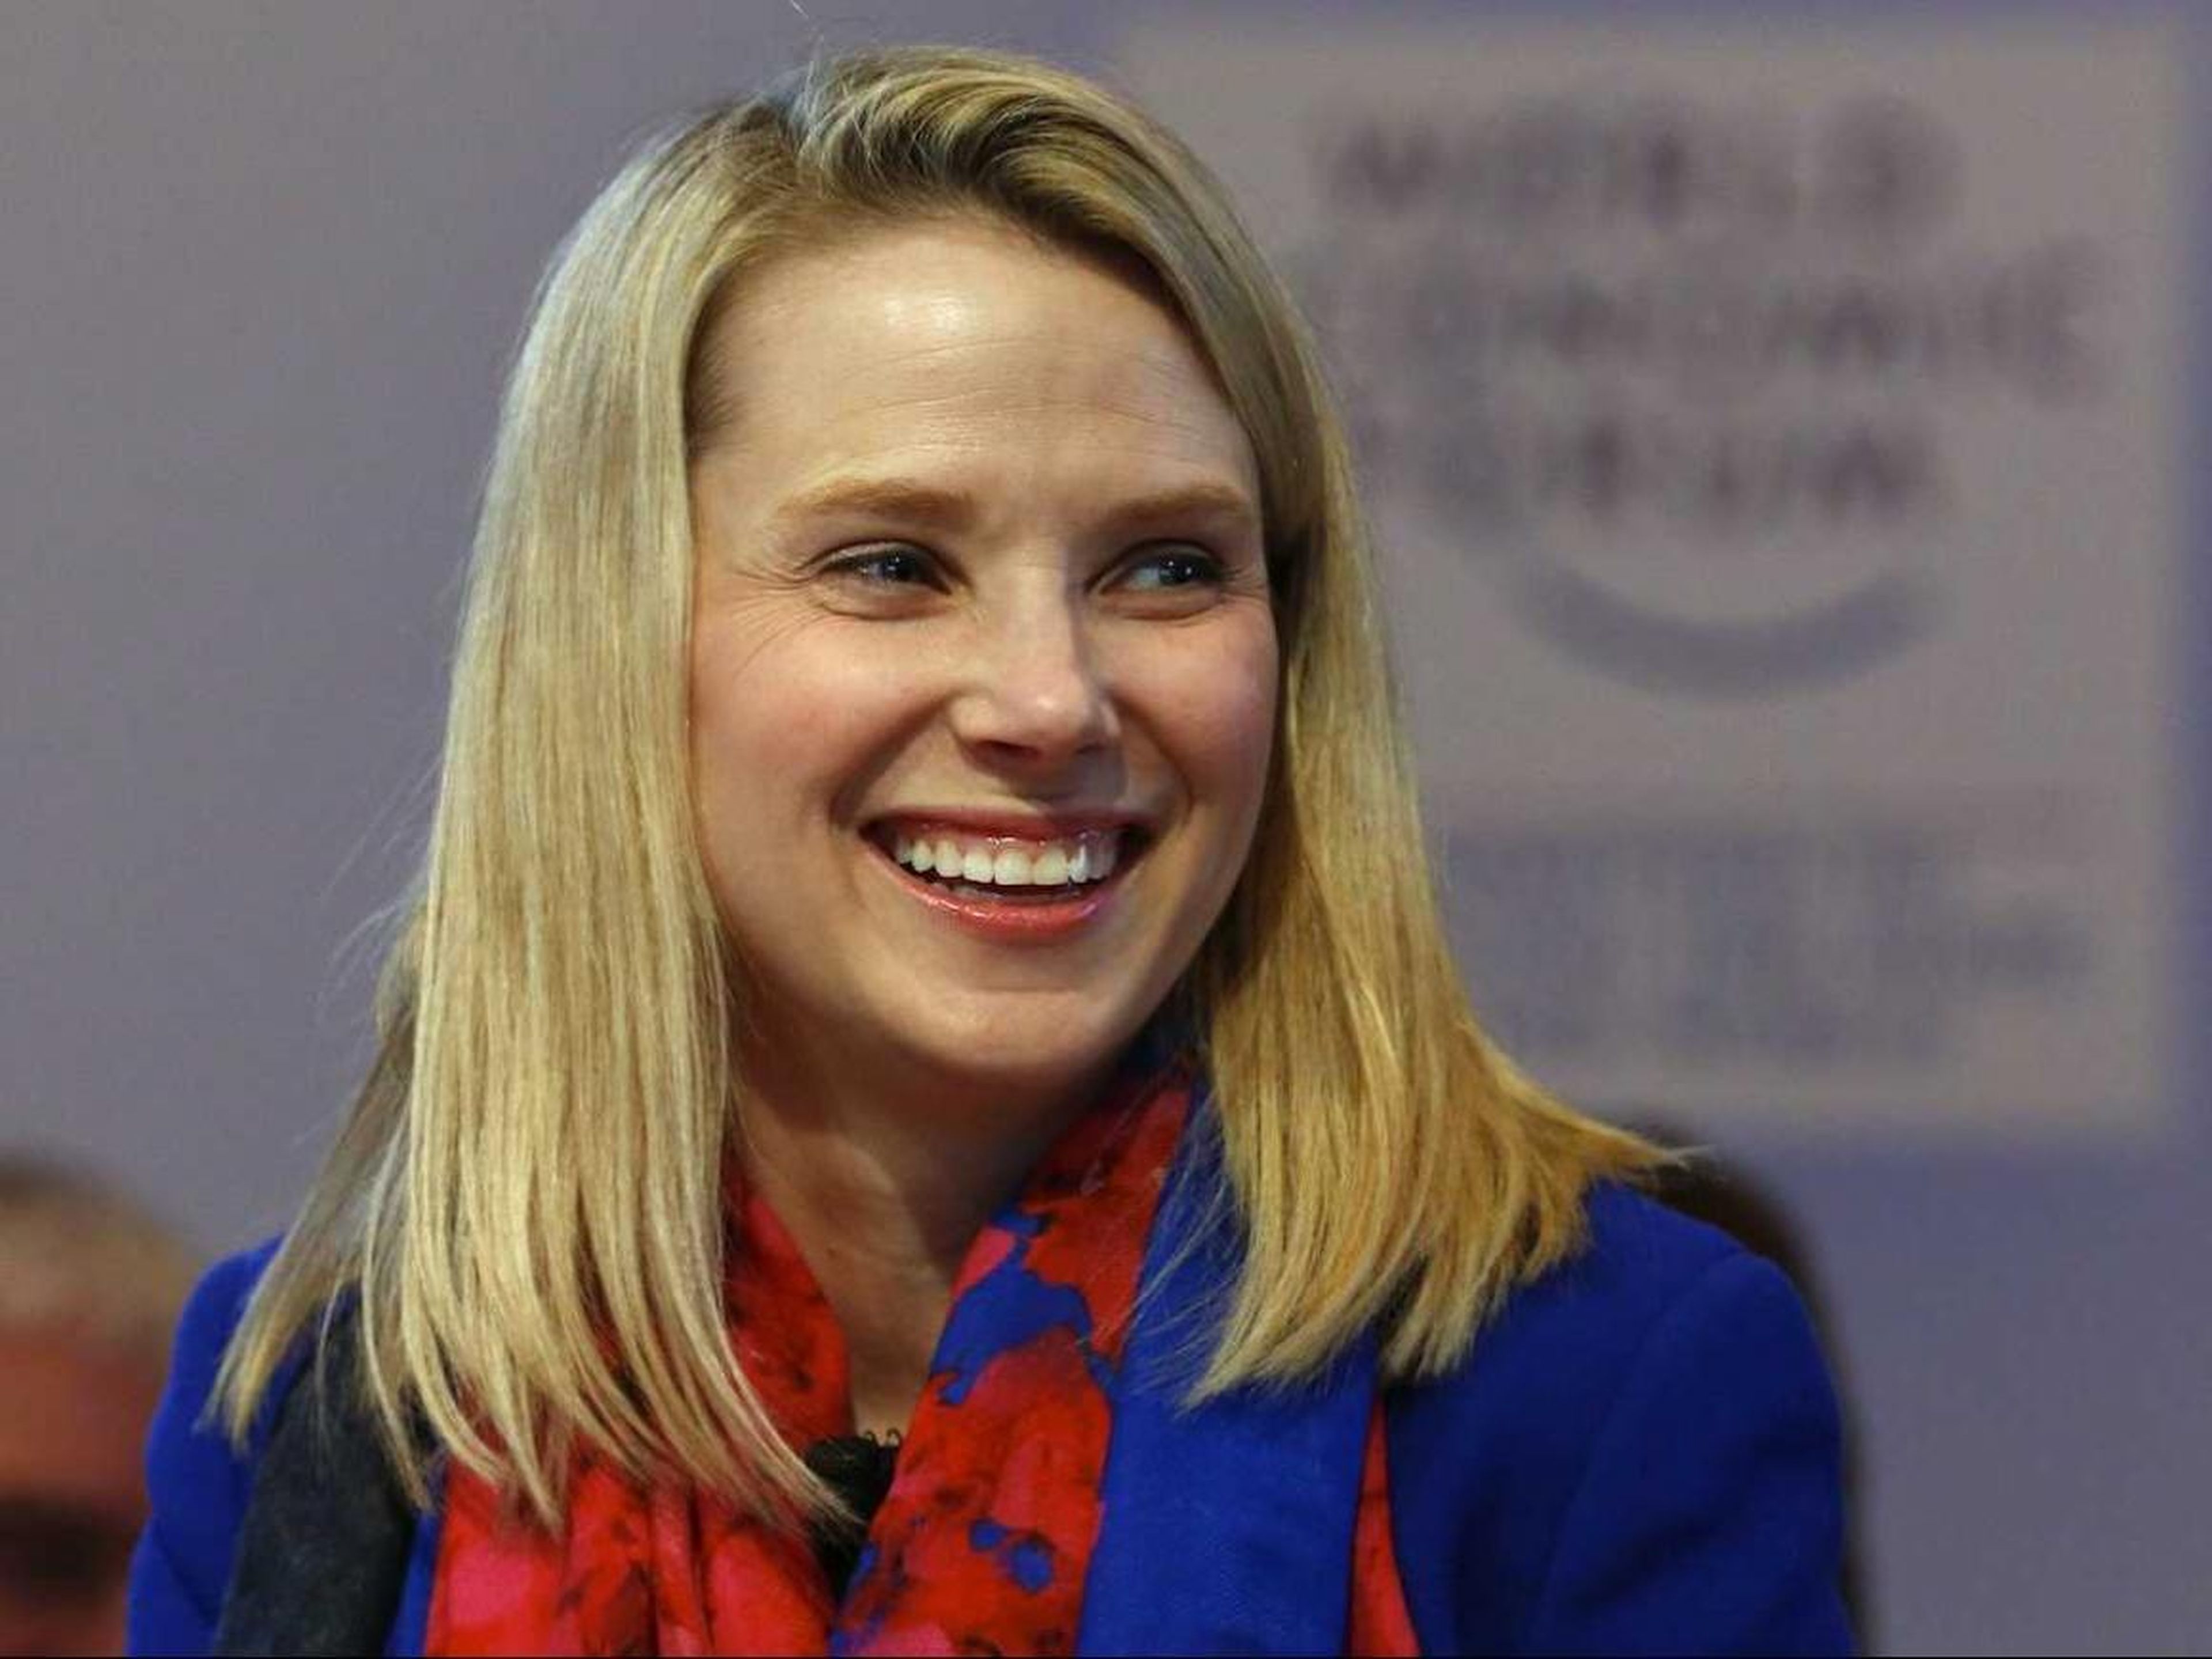 Marissa Mayer served as the CEO of Yahoo from 2012 to 2017.